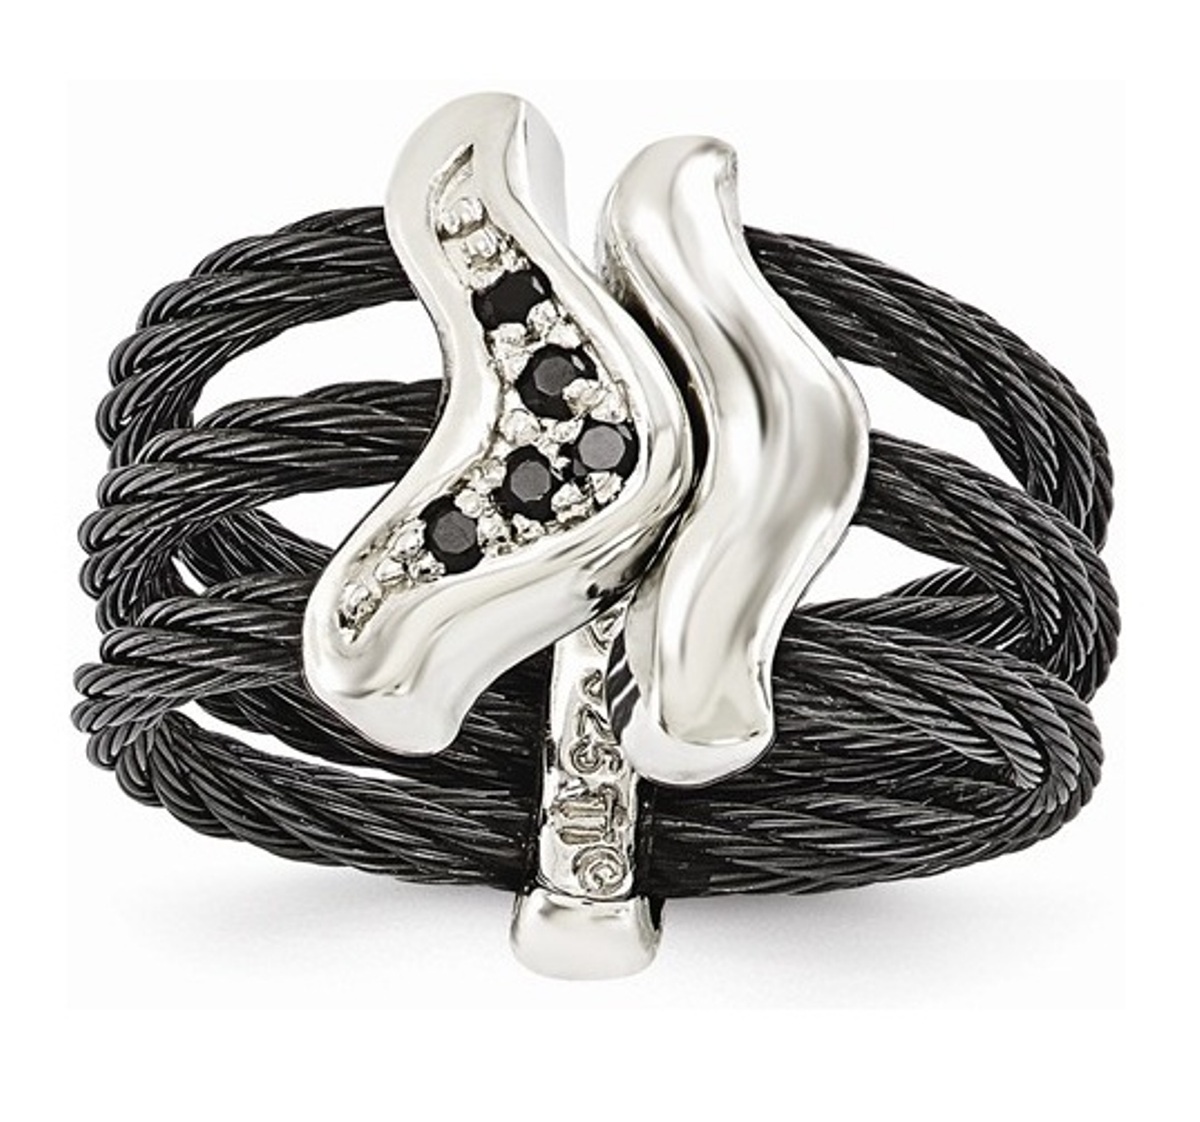  Black Ti With Sterling Silver Black Spinel Cable Flexible Ring